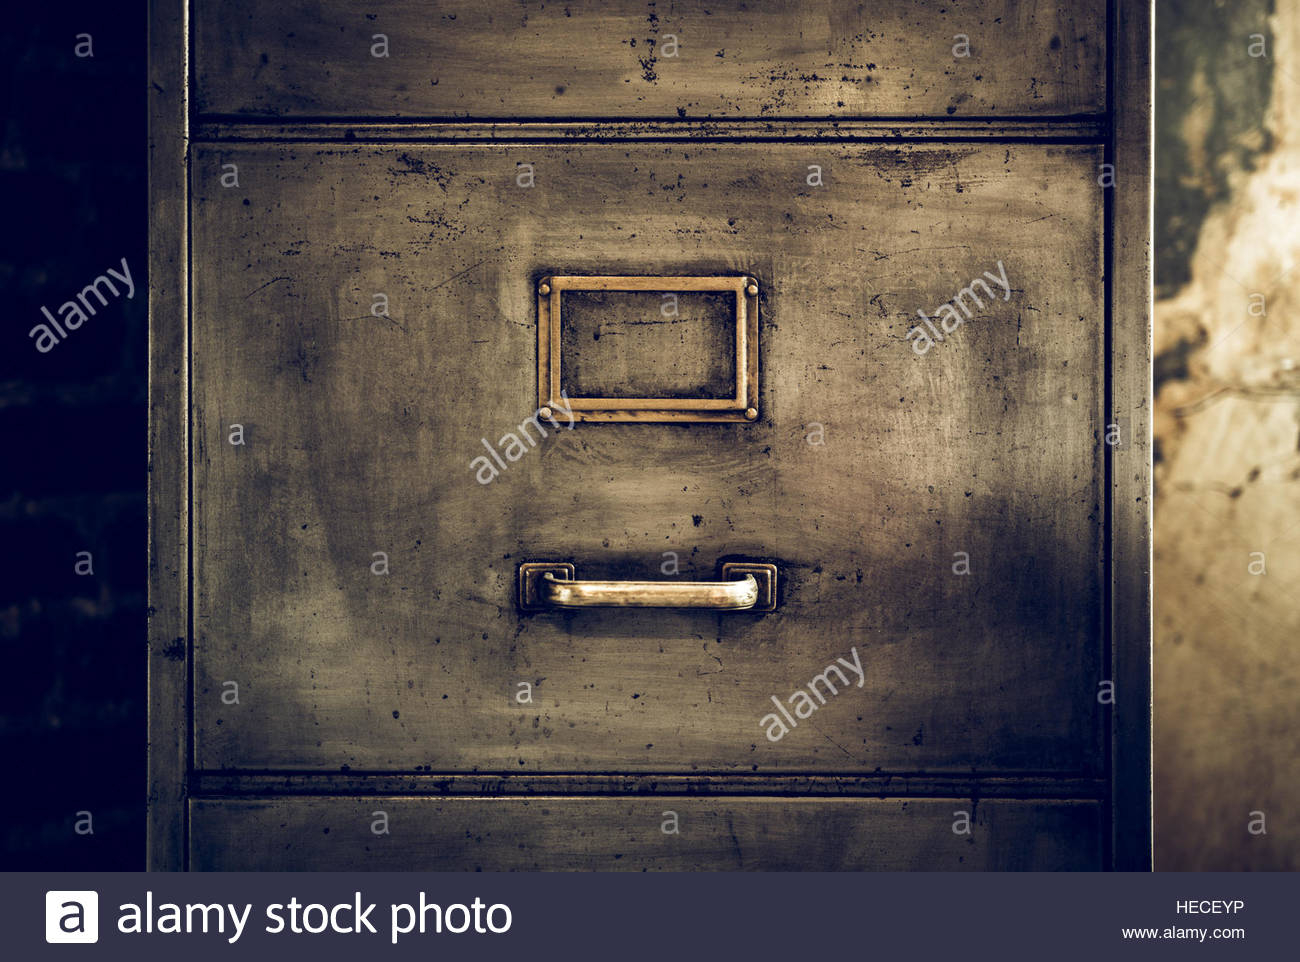 Close Up Photo Of A Distressed Metal Filing Cabinet Stock Photo for sizing 1300 X 962